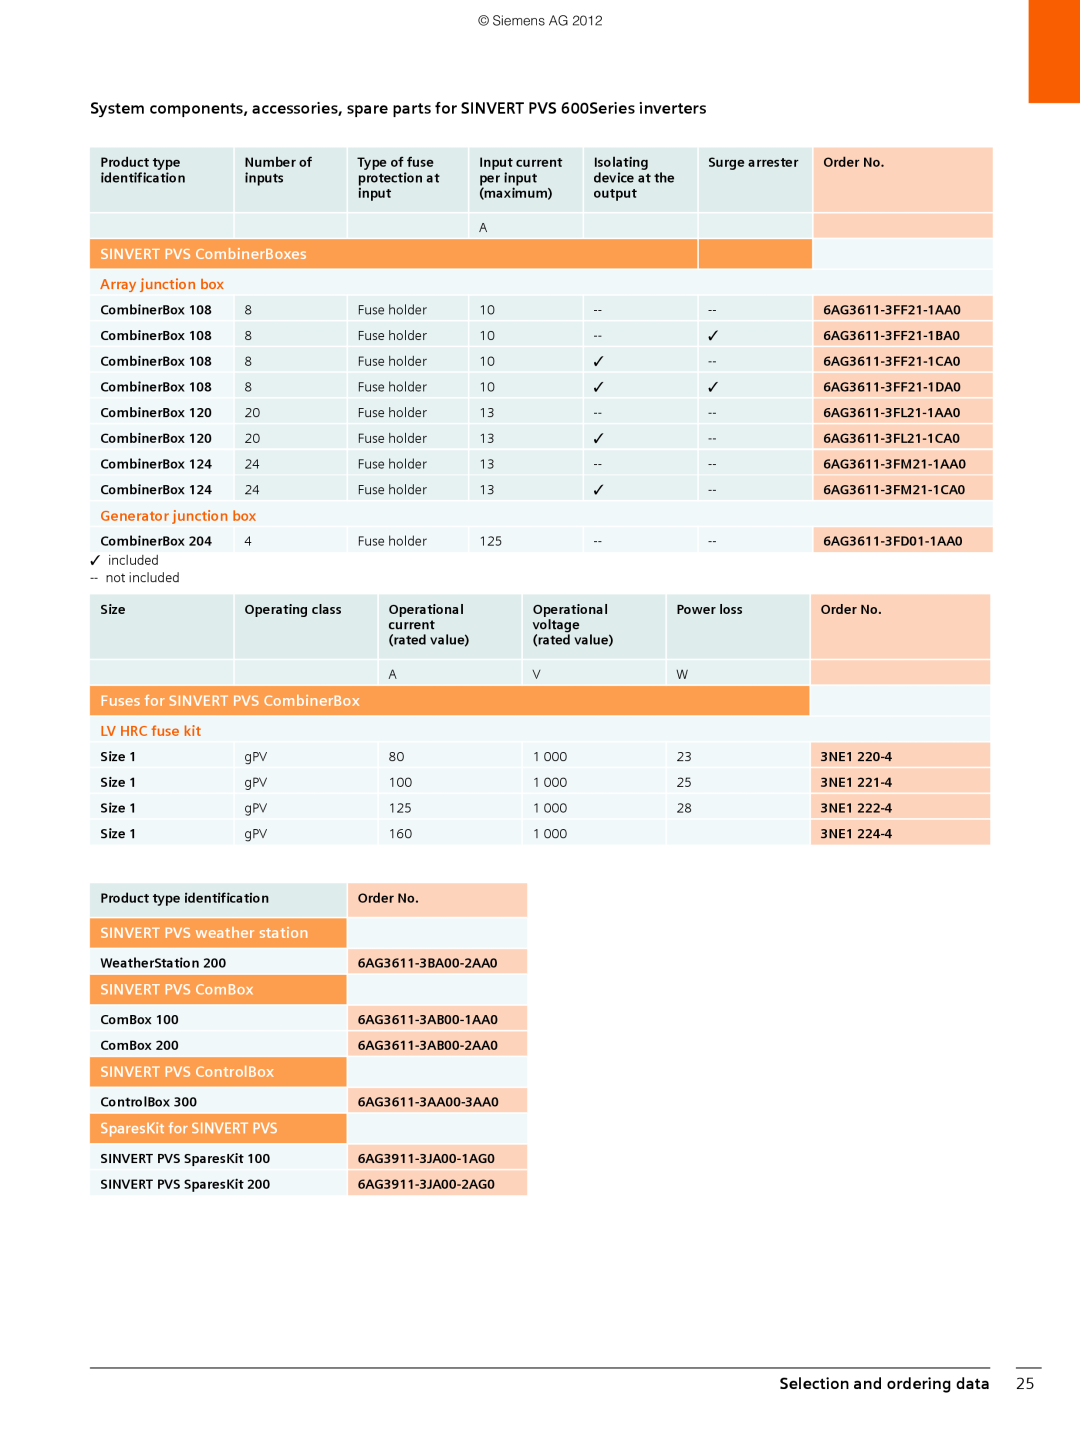 Siemens 600 brochure Selection and ordering data, SINVERT PVS CombinerBoxes, Generator junction box, LV HRC fuse kit 